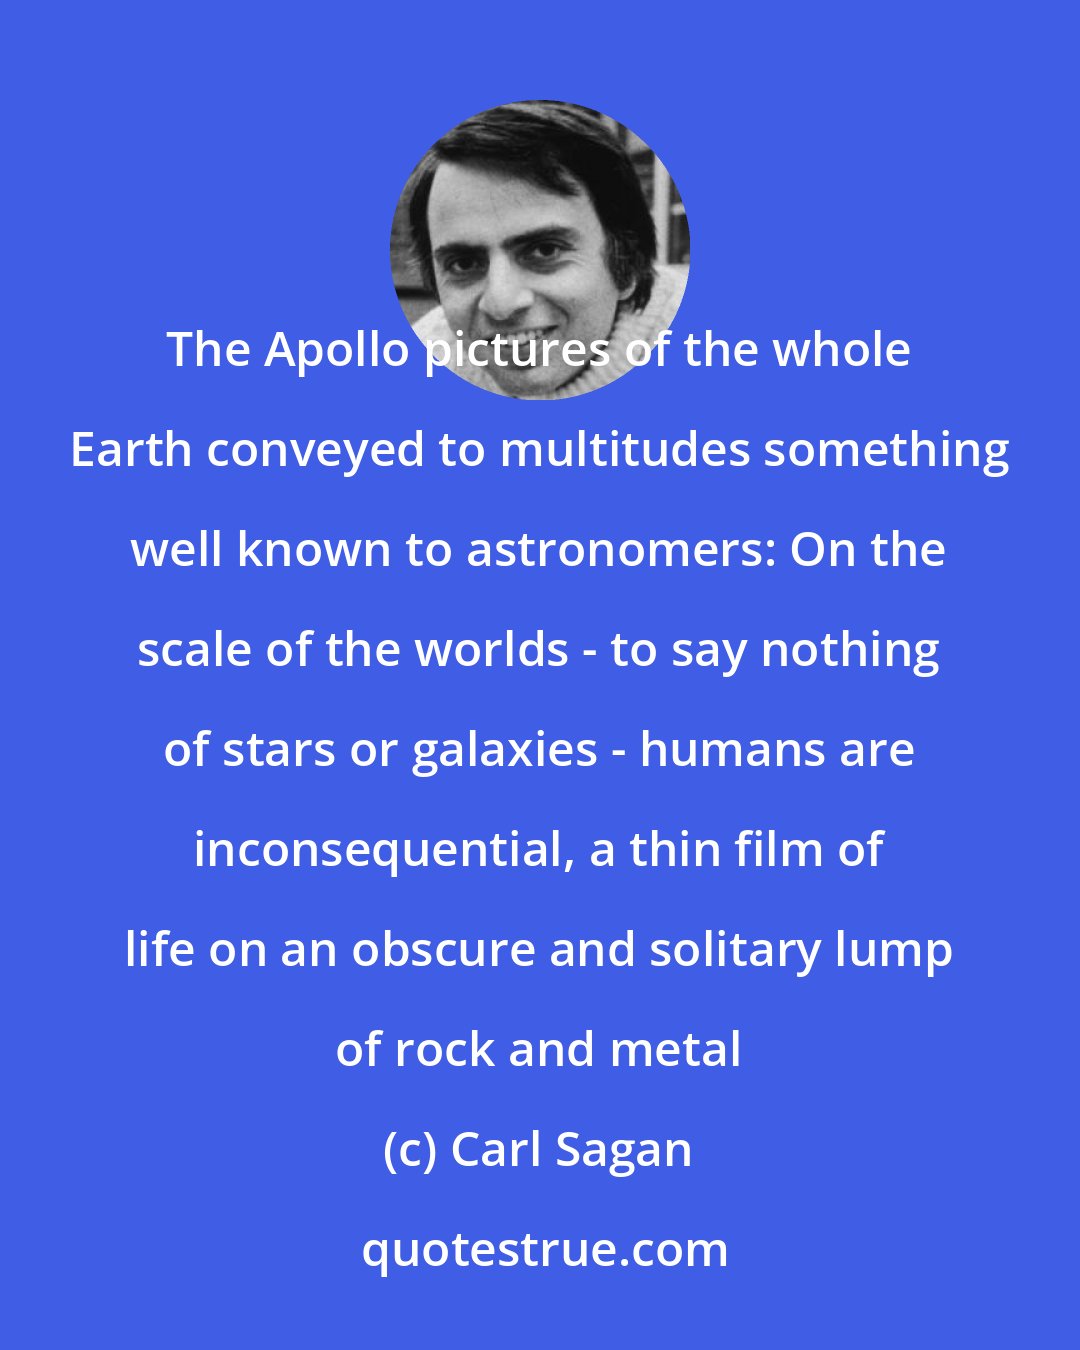 Carl Sagan: The Apollo pictures of the whole Earth conveyed to multitudes something well known to astronomers: On the scale of the worlds - to say nothing of stars or galaxies - humans are inconsequential, a thin film of life on an obscure and solitary lump of rock and metal